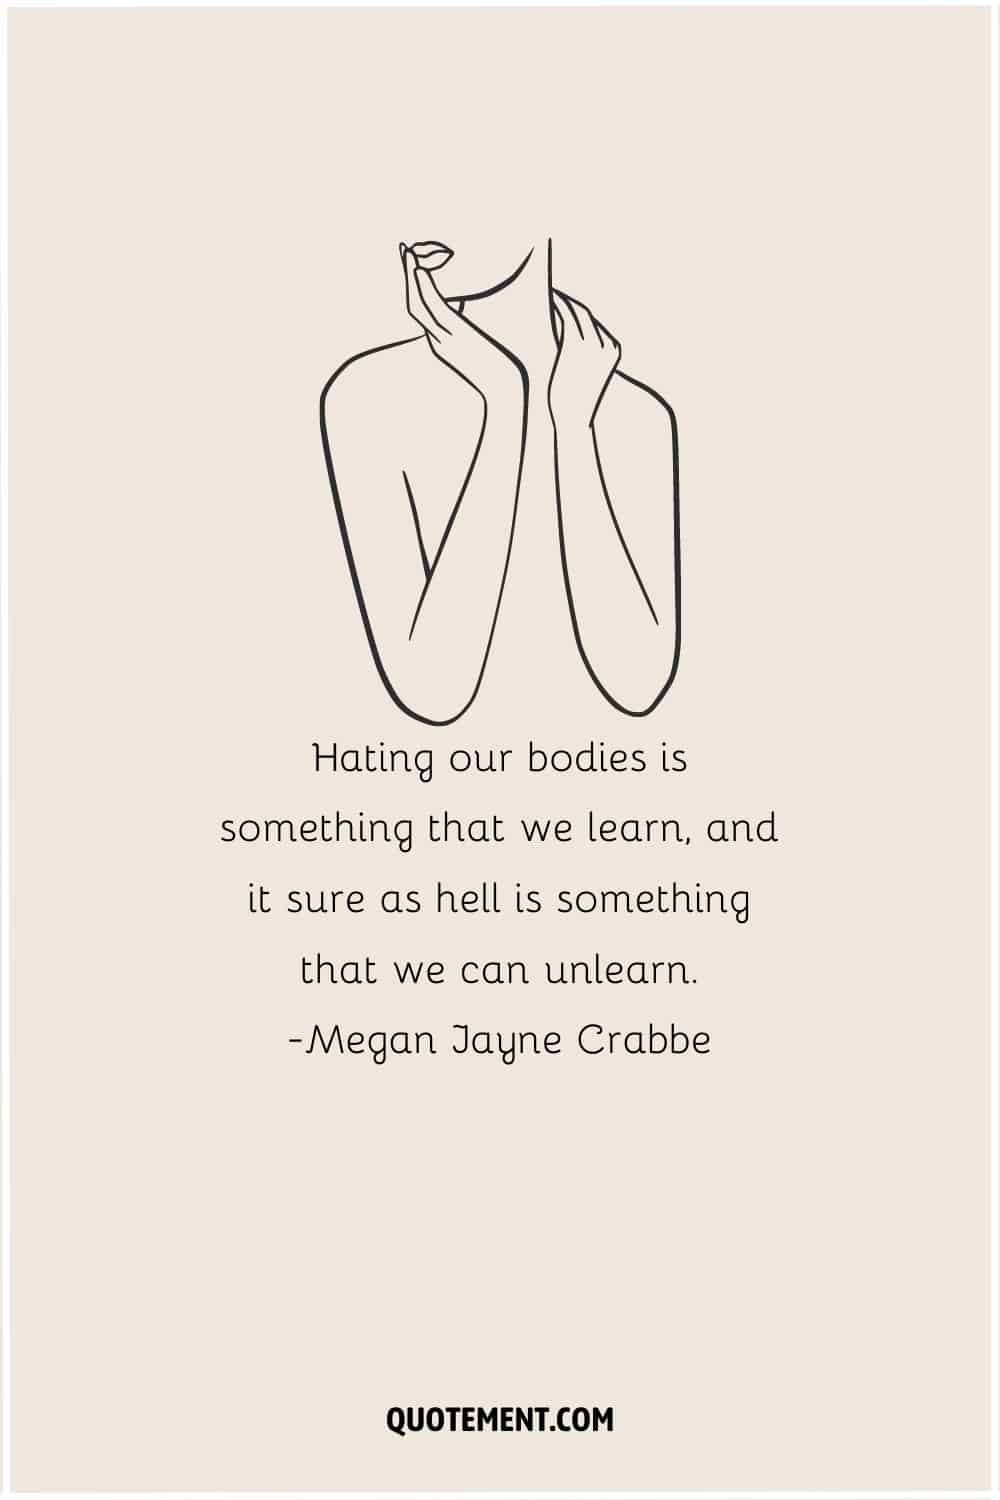 Hating our bodies is something that we learn, and it sure as hell is something that we can unlearn